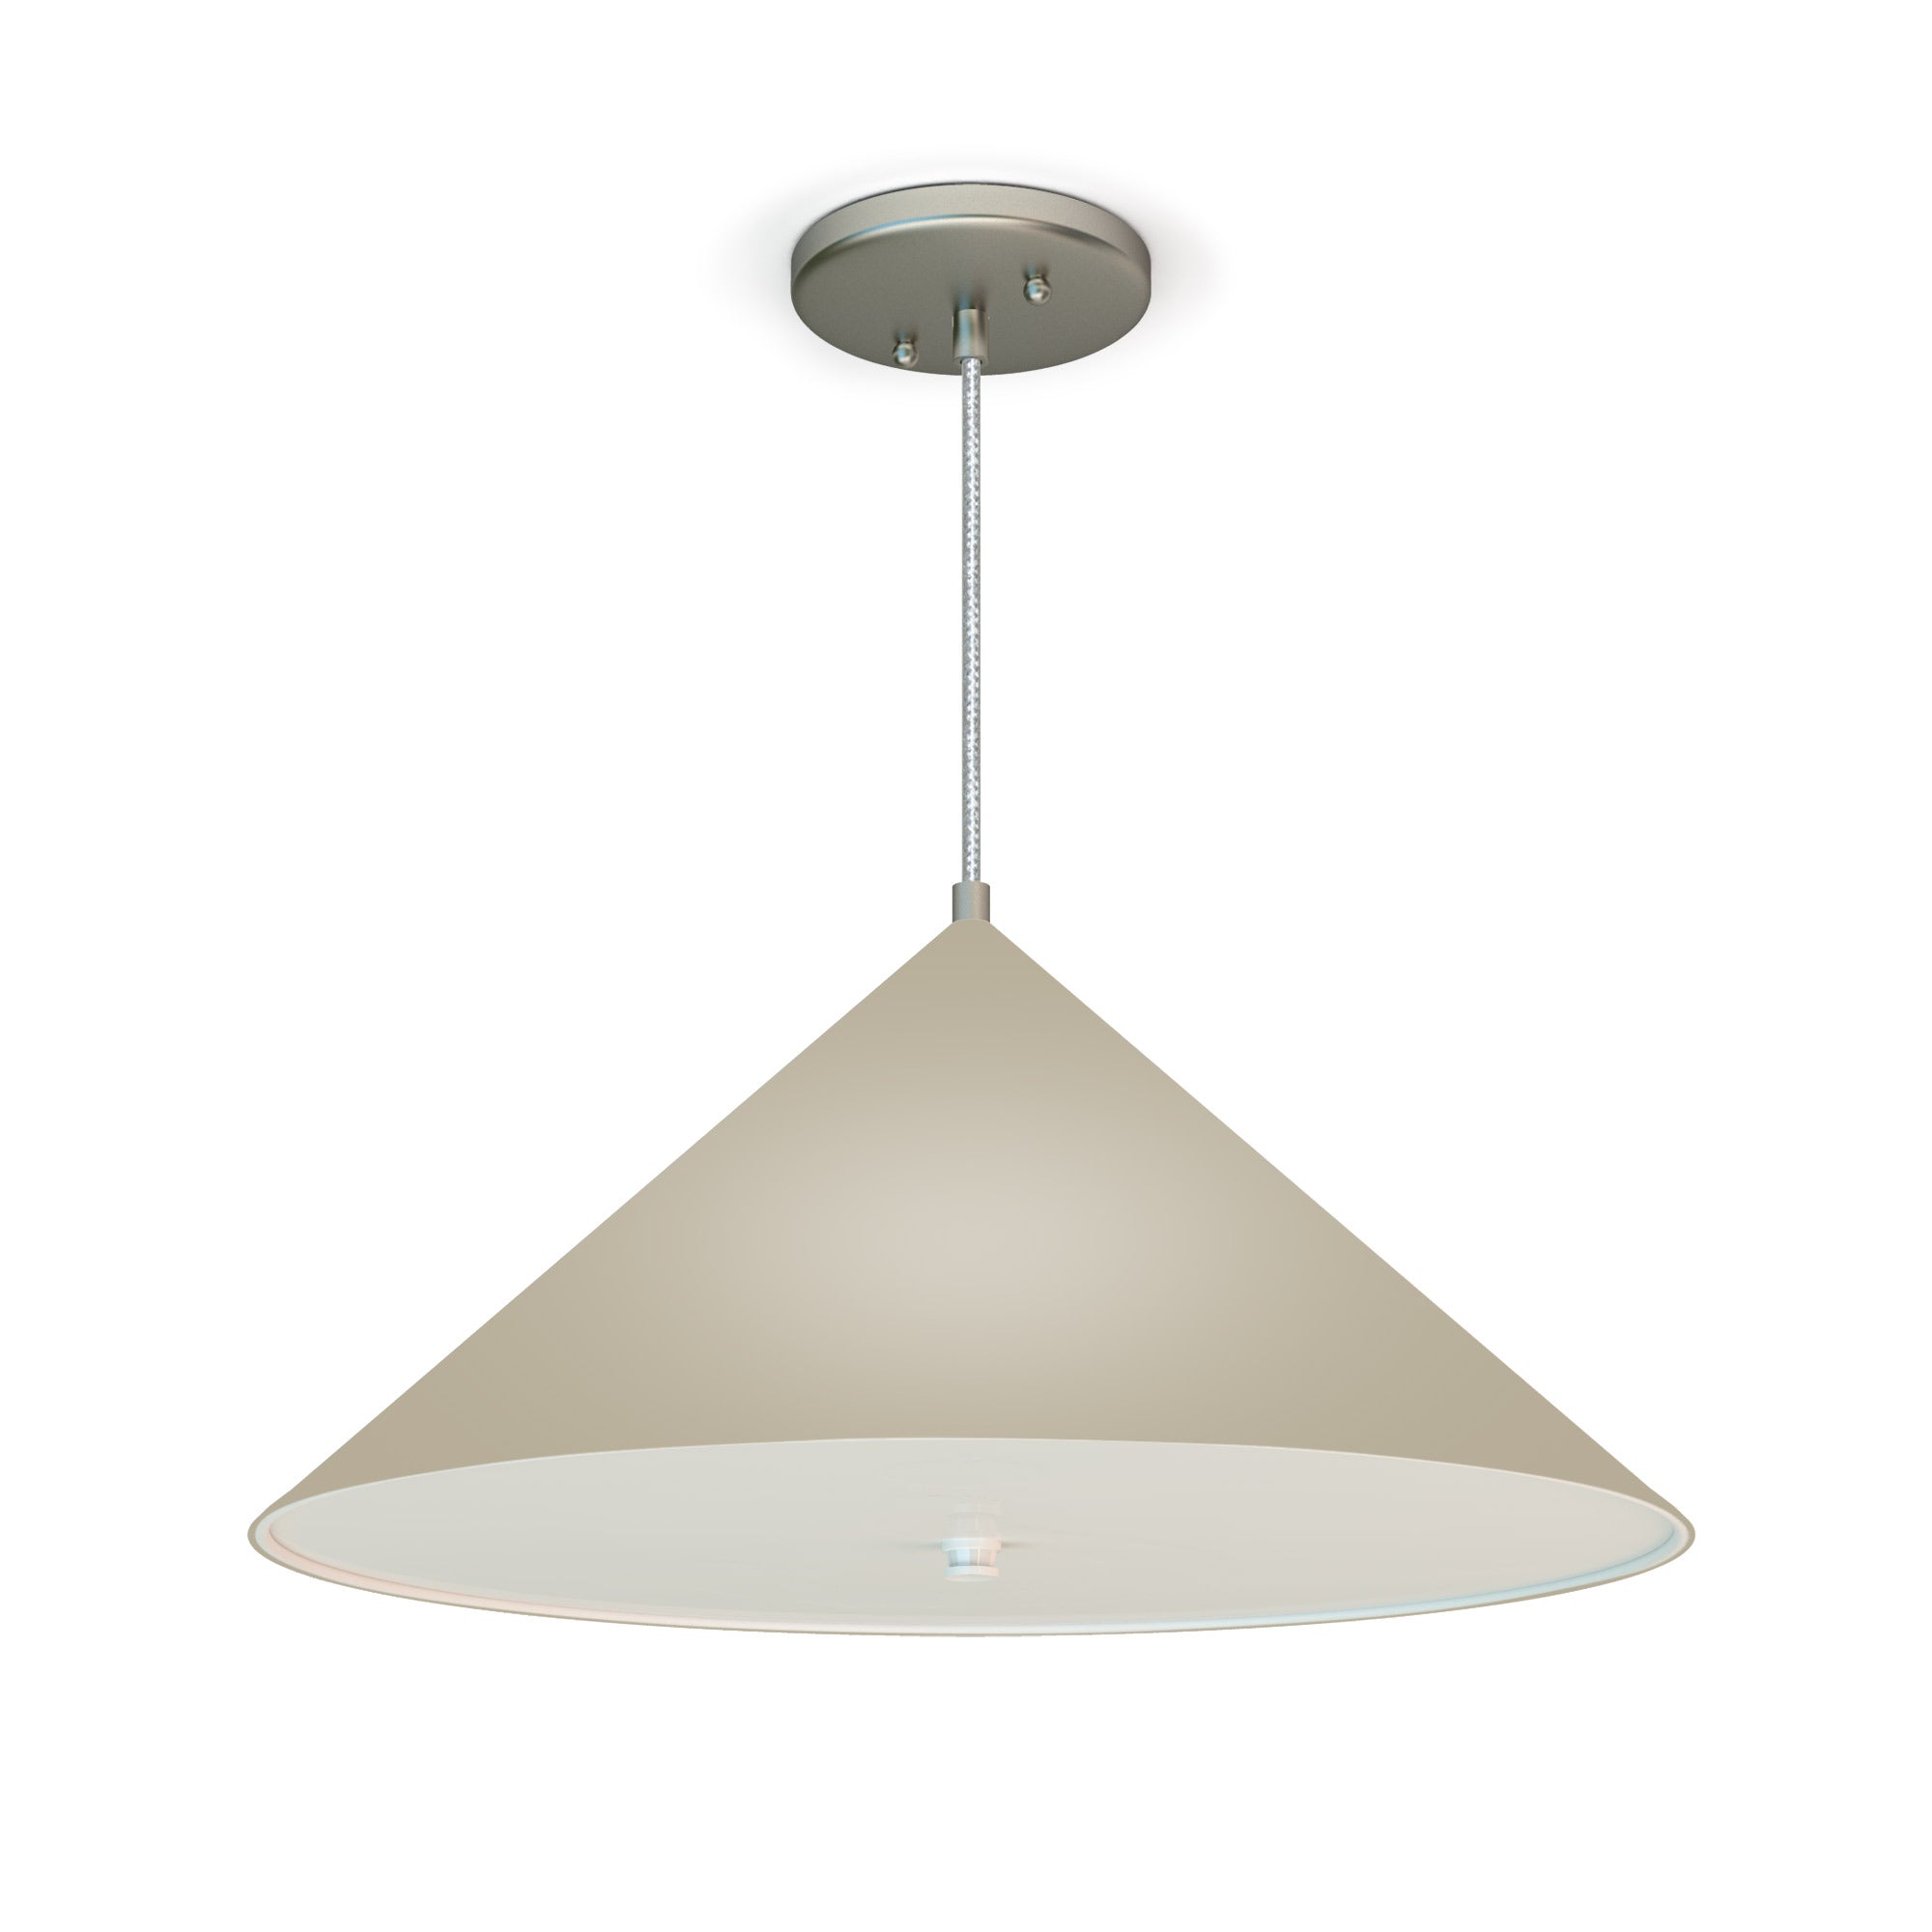 The Angelica hanging ceiling light is the perfect addition to any space within your home or hospitality project. Available in a variety of sizes with hand-tailored textured fabric or a photo veneer shade, this light brings texture and beauty to bars, kitchen islands, hallways, foyers, and bedrooms.